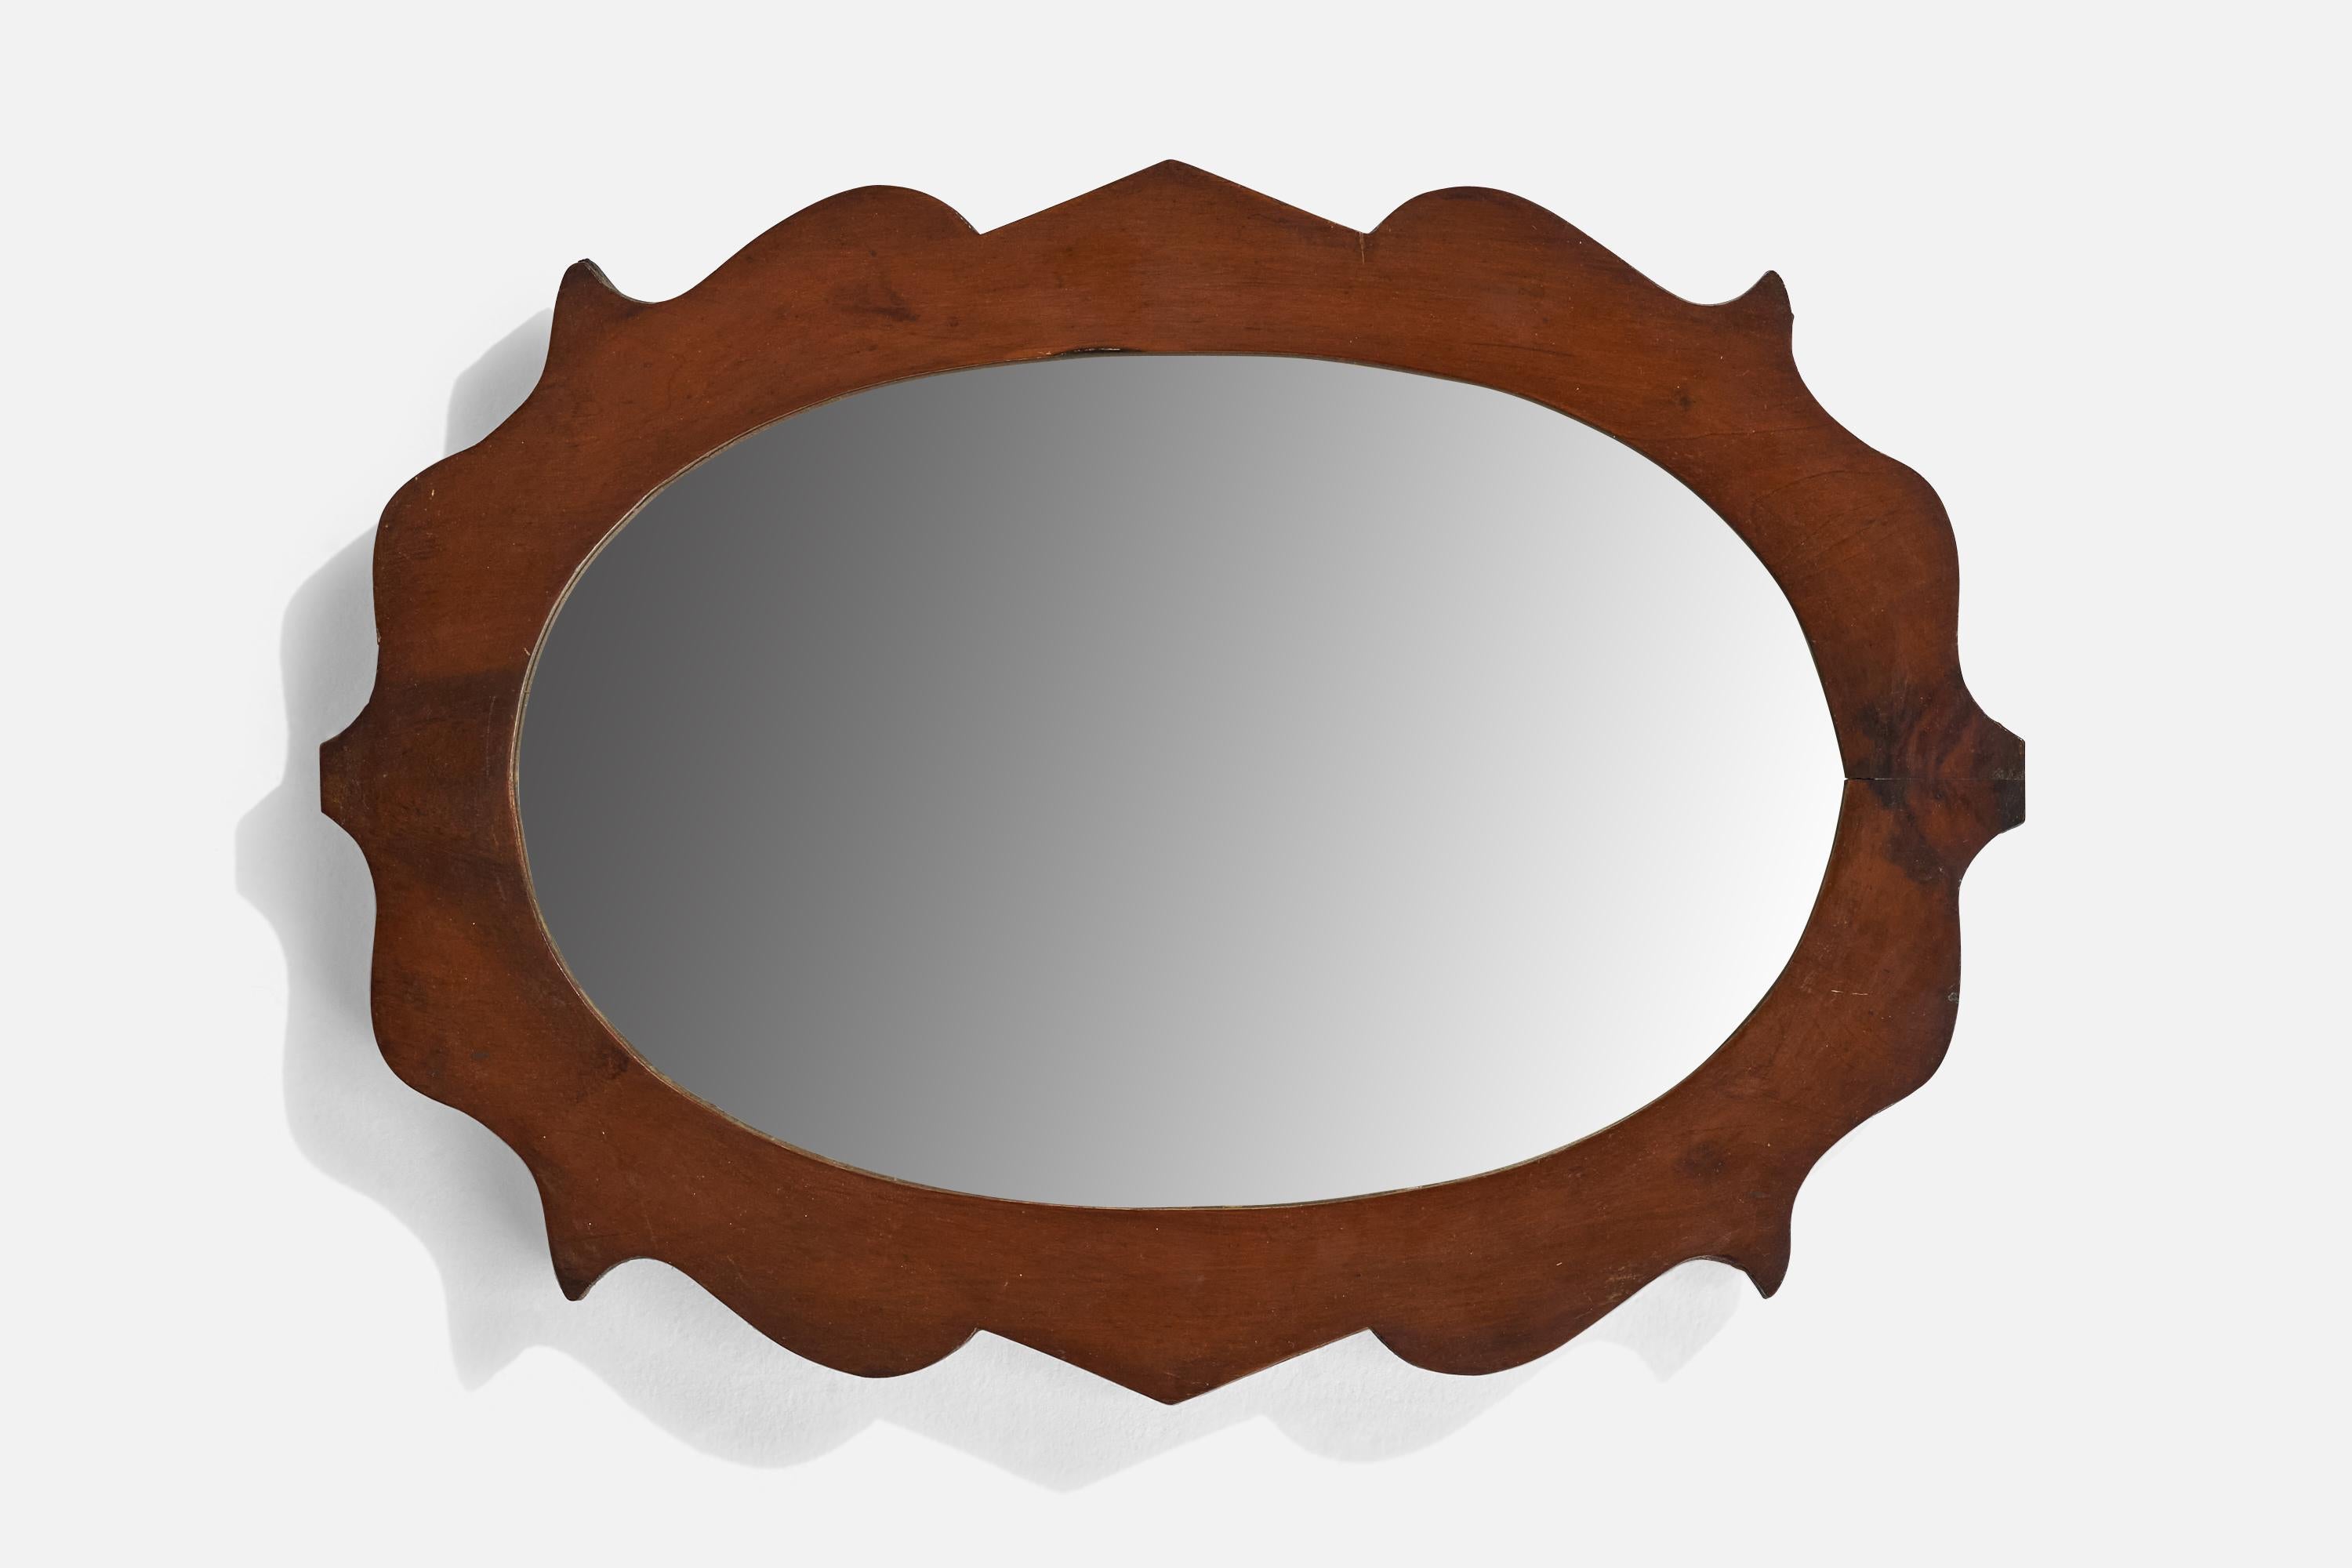 A freeform birch wall mirror designed and produced in Sweden, c. 1940s.